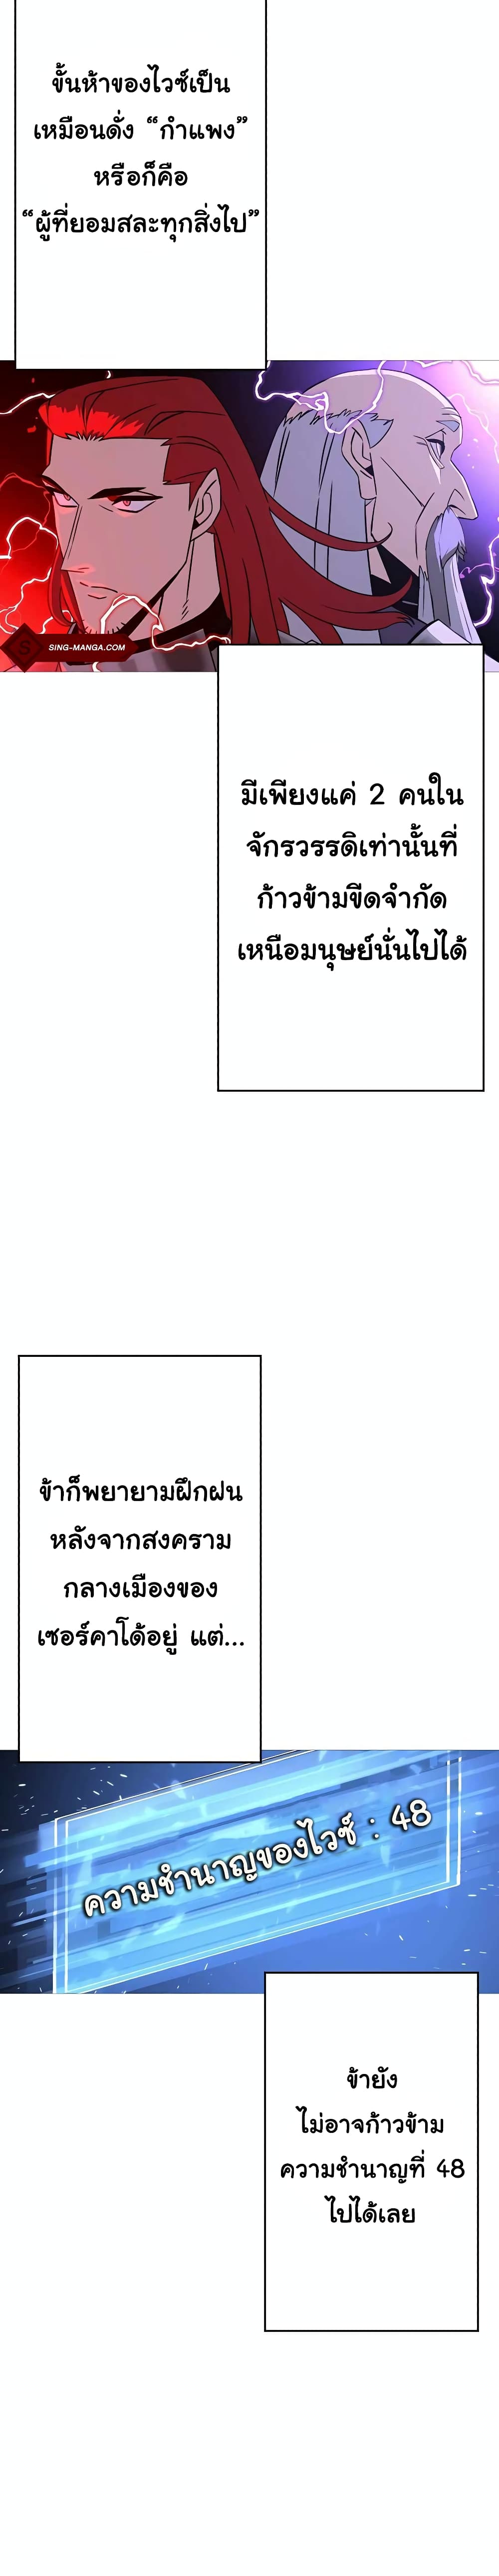 The Story of a Low Rank Soldier Becoming a Monarch เธ•เธญเธเธ—เธตเน 108 (5)